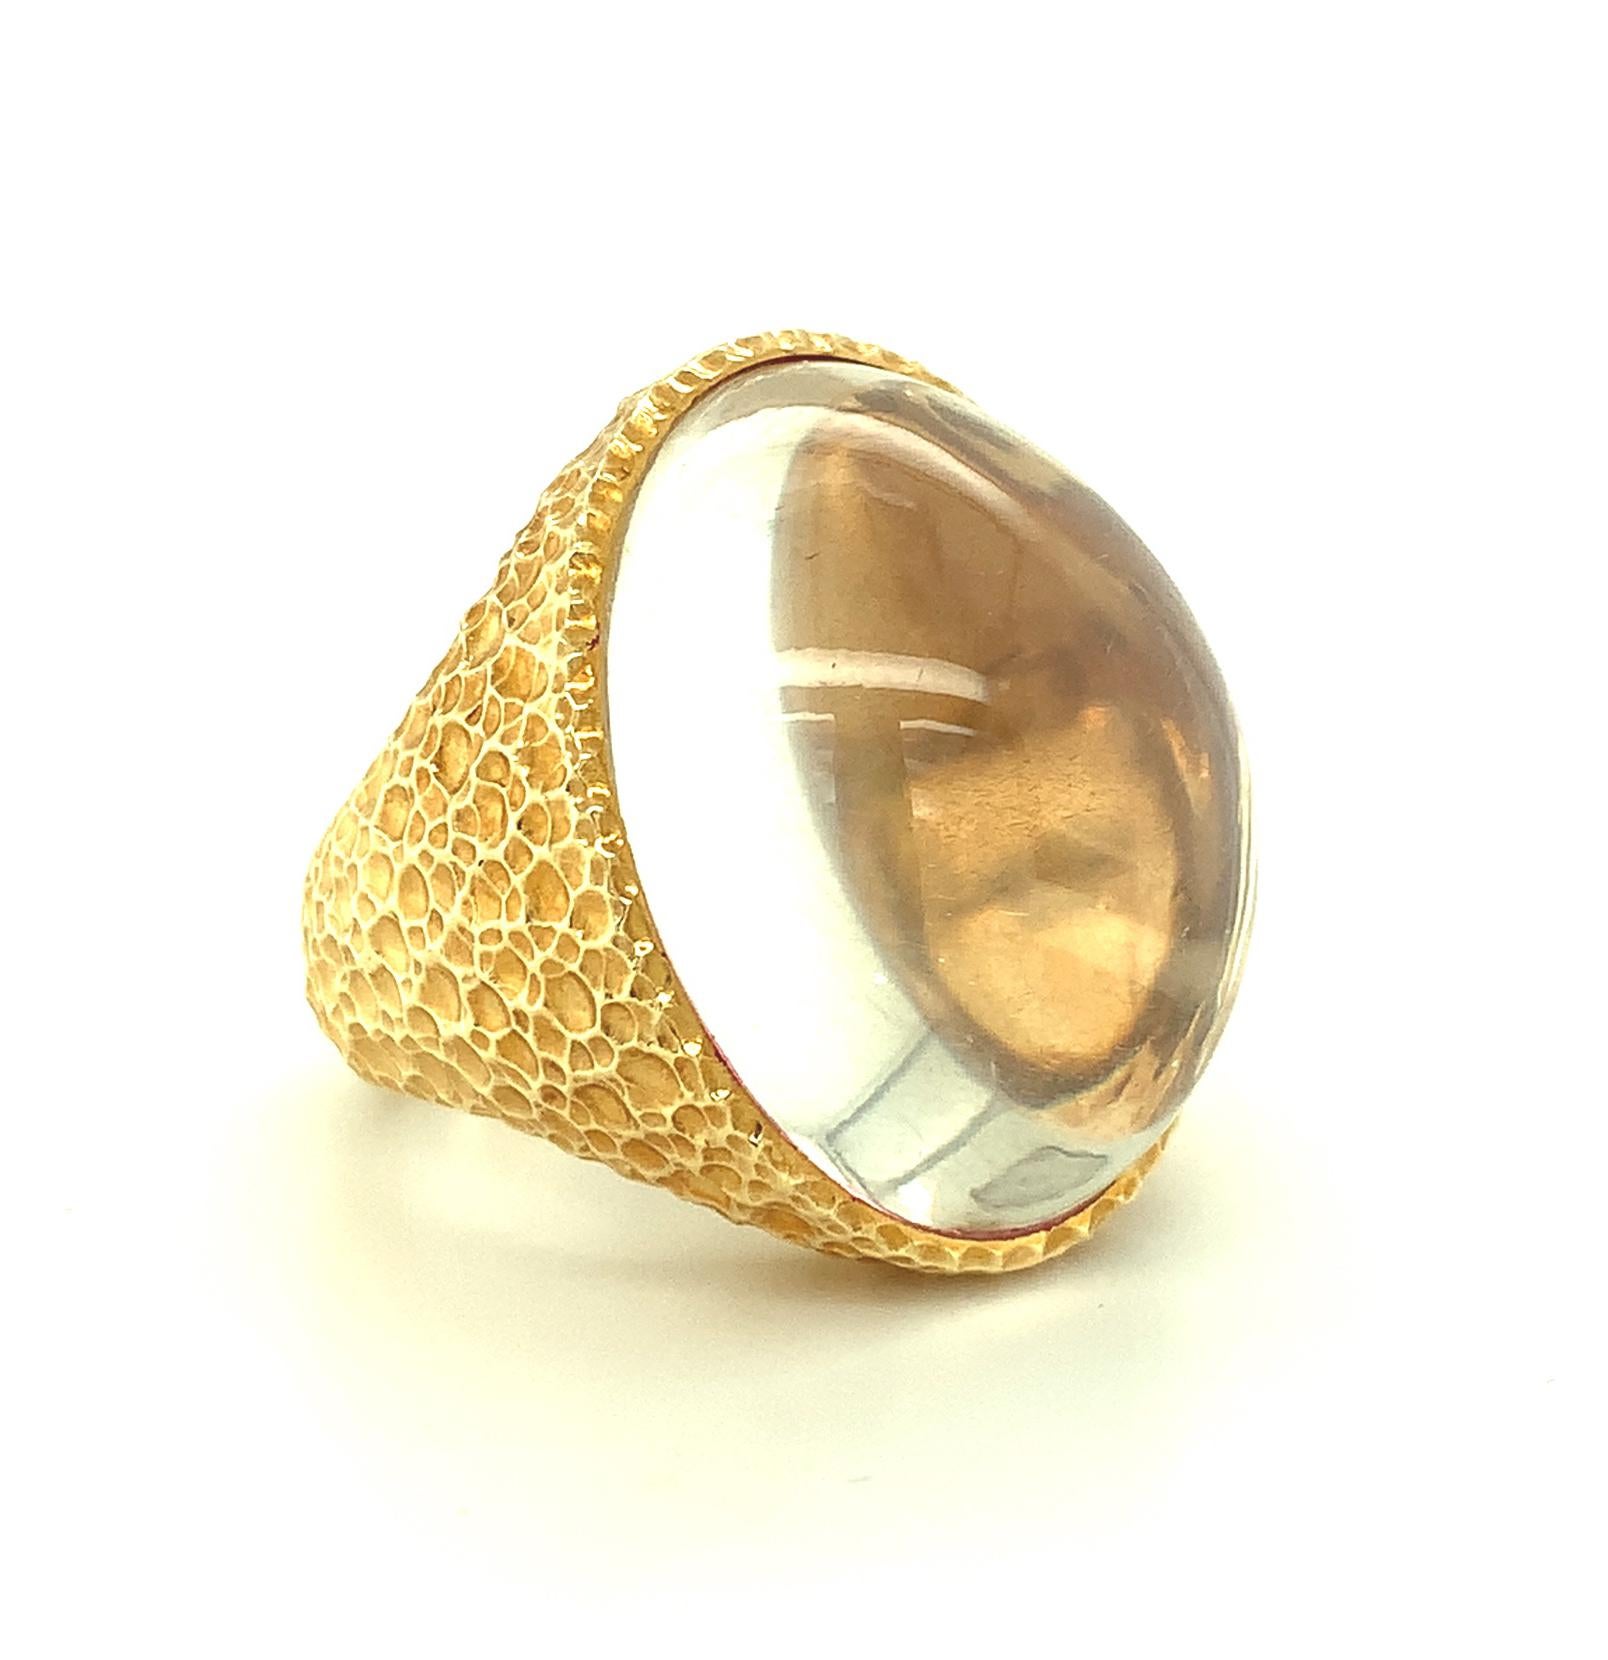 This ring features a giant oval moonstone cabochon weighing over 50 carats! It is unusual in that it is highly transparent but has delicate, sparkly 